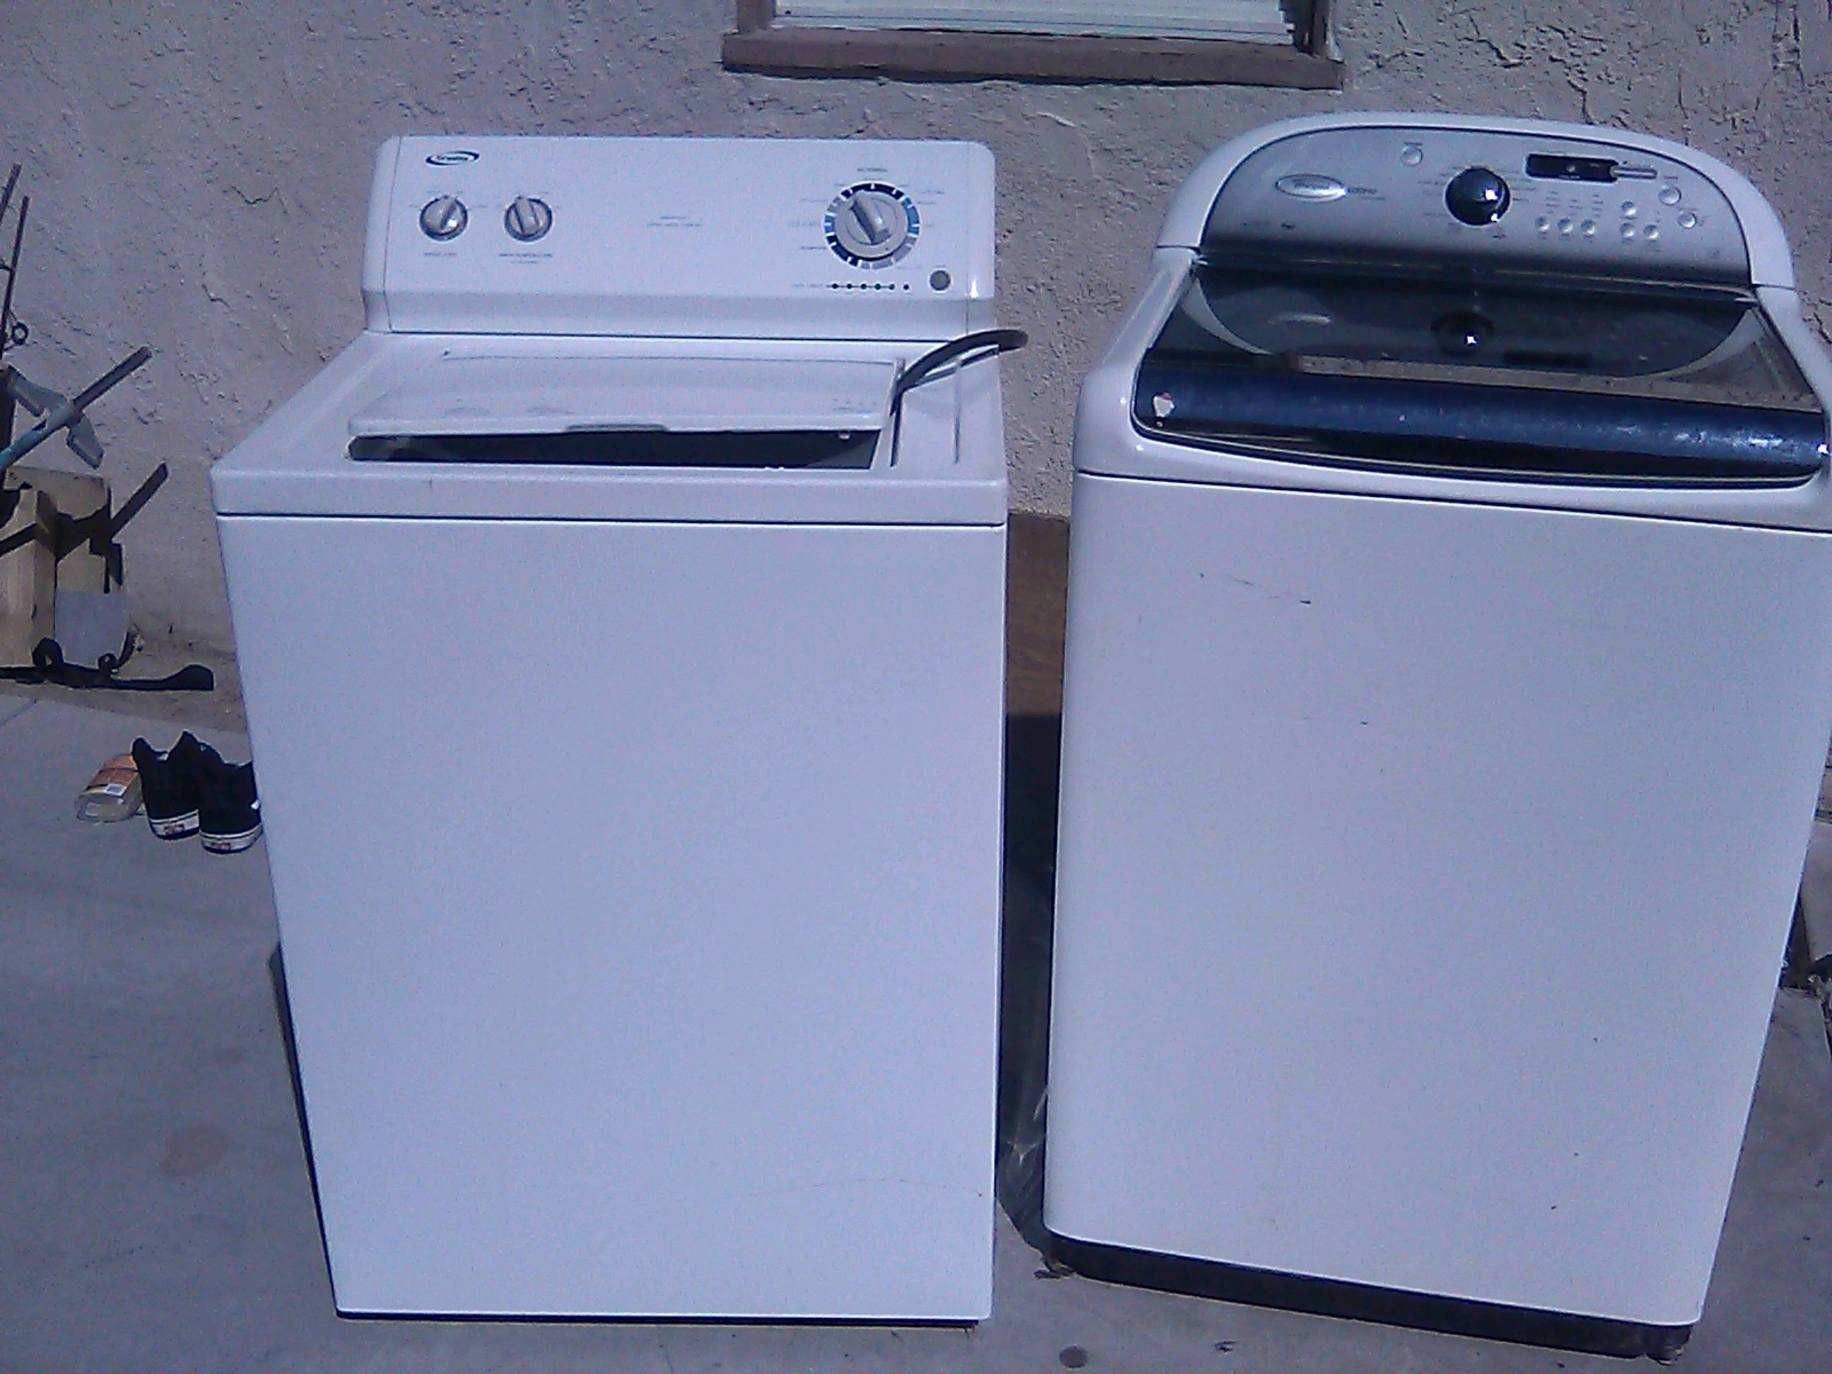 Two washers